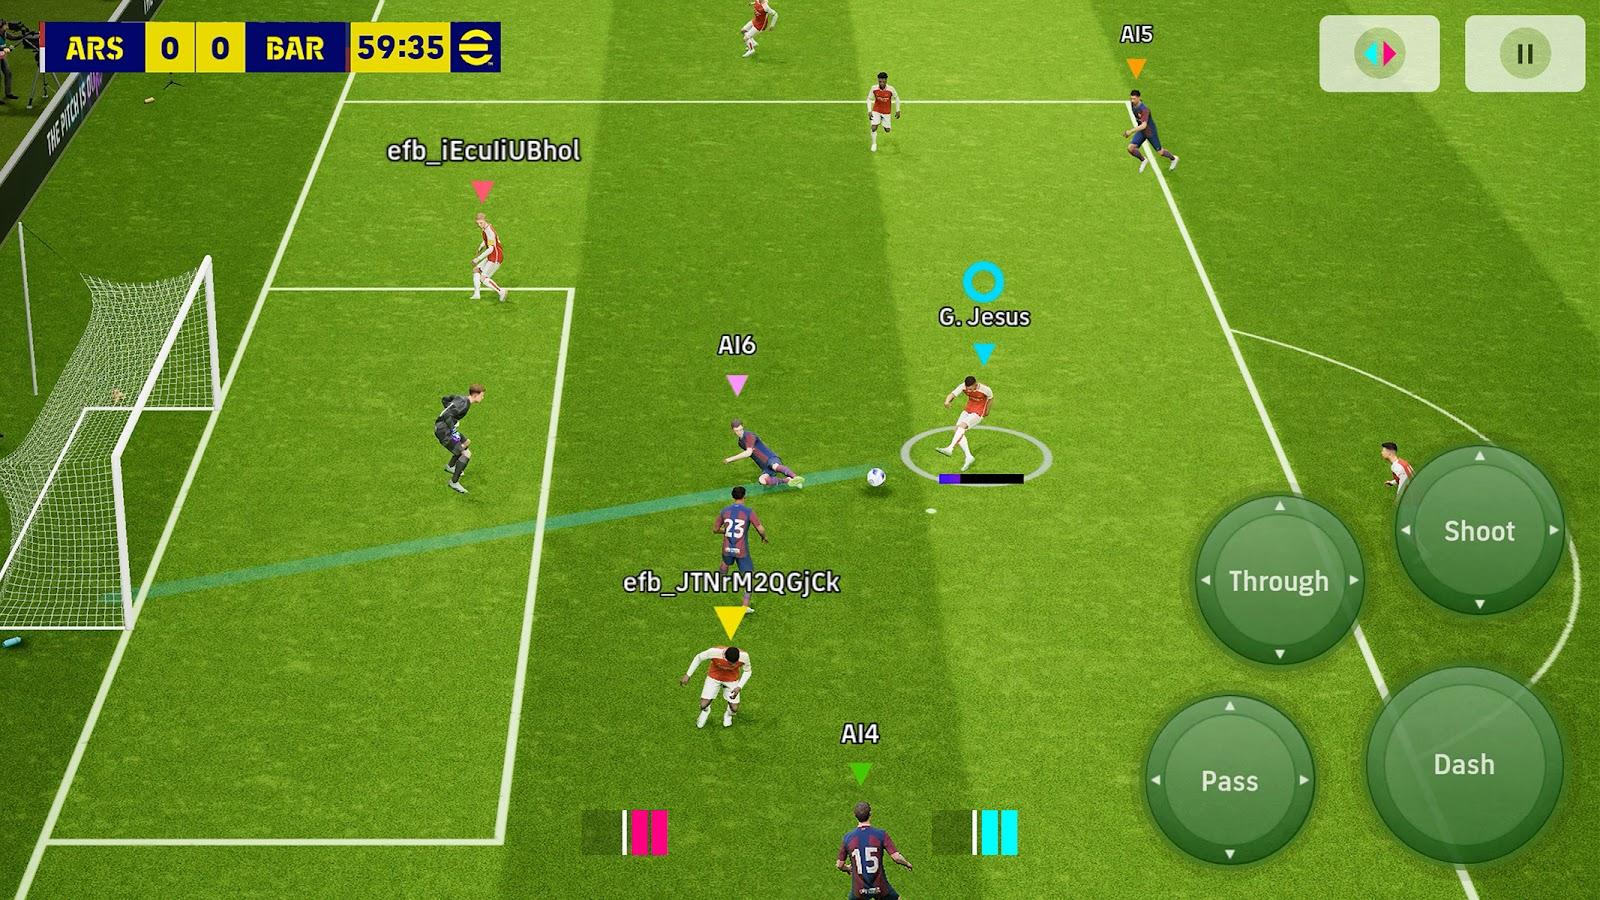 efootball ps5 download free